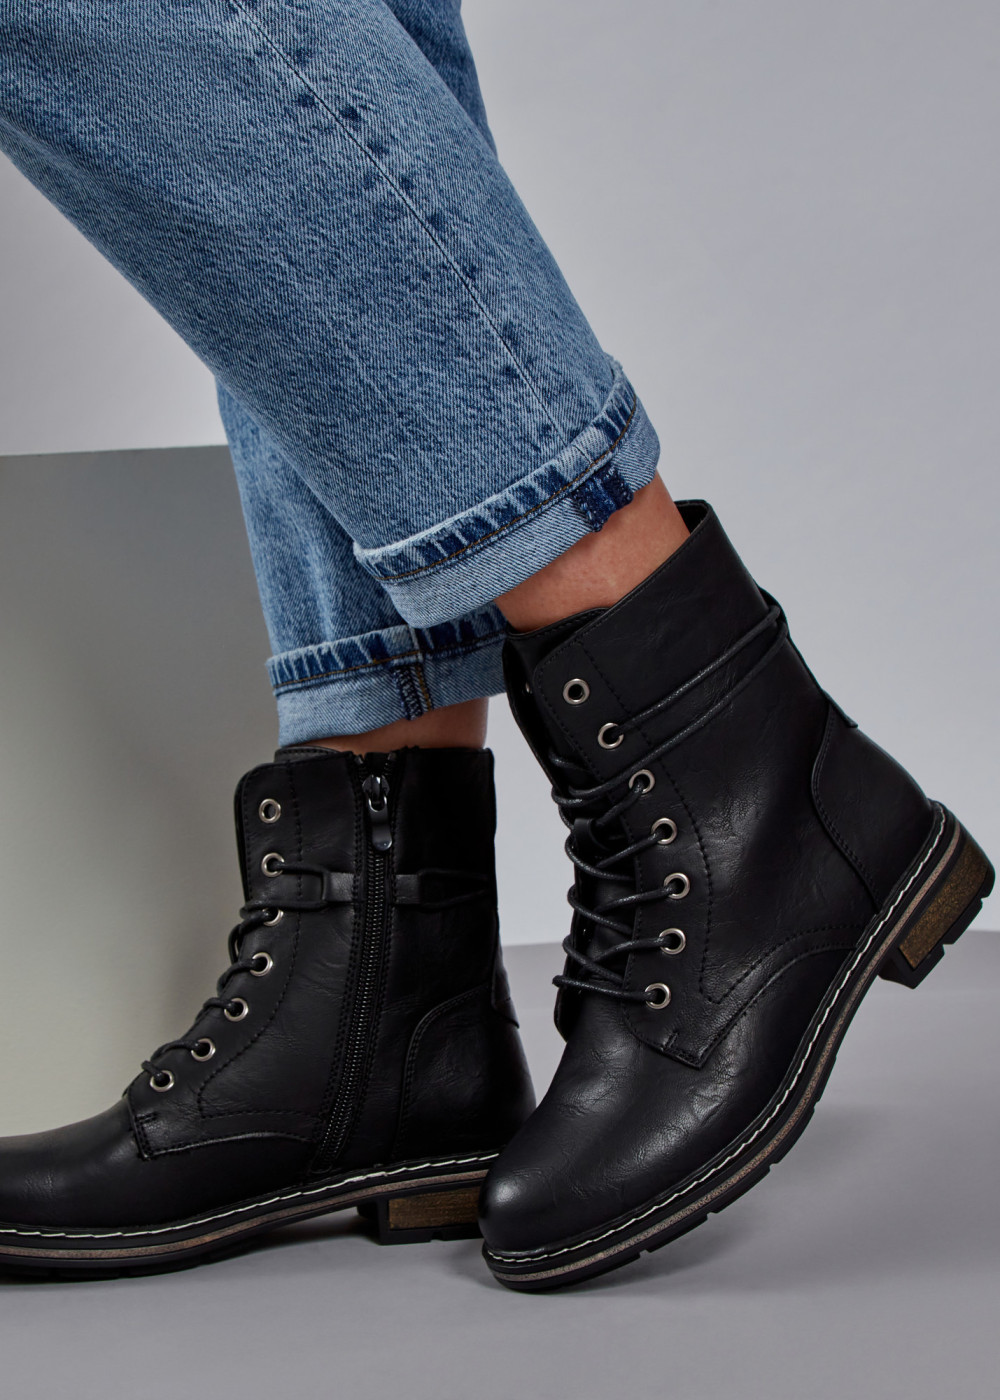 Black rustic lace up ankle boots 4